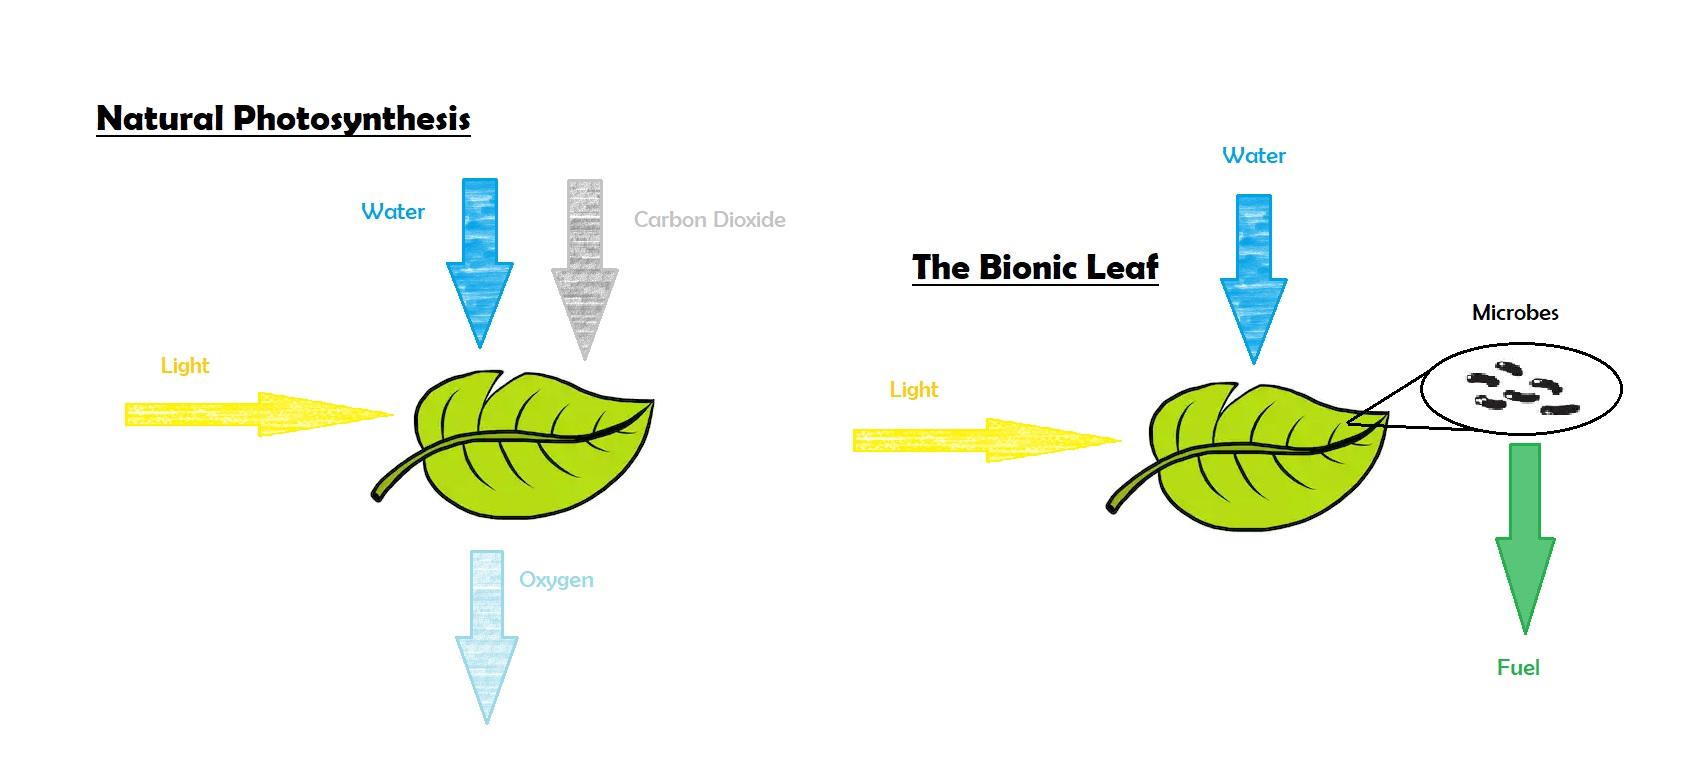 Natural_Photosynthesis_vs_the_Bionic_Leaf.jpeg